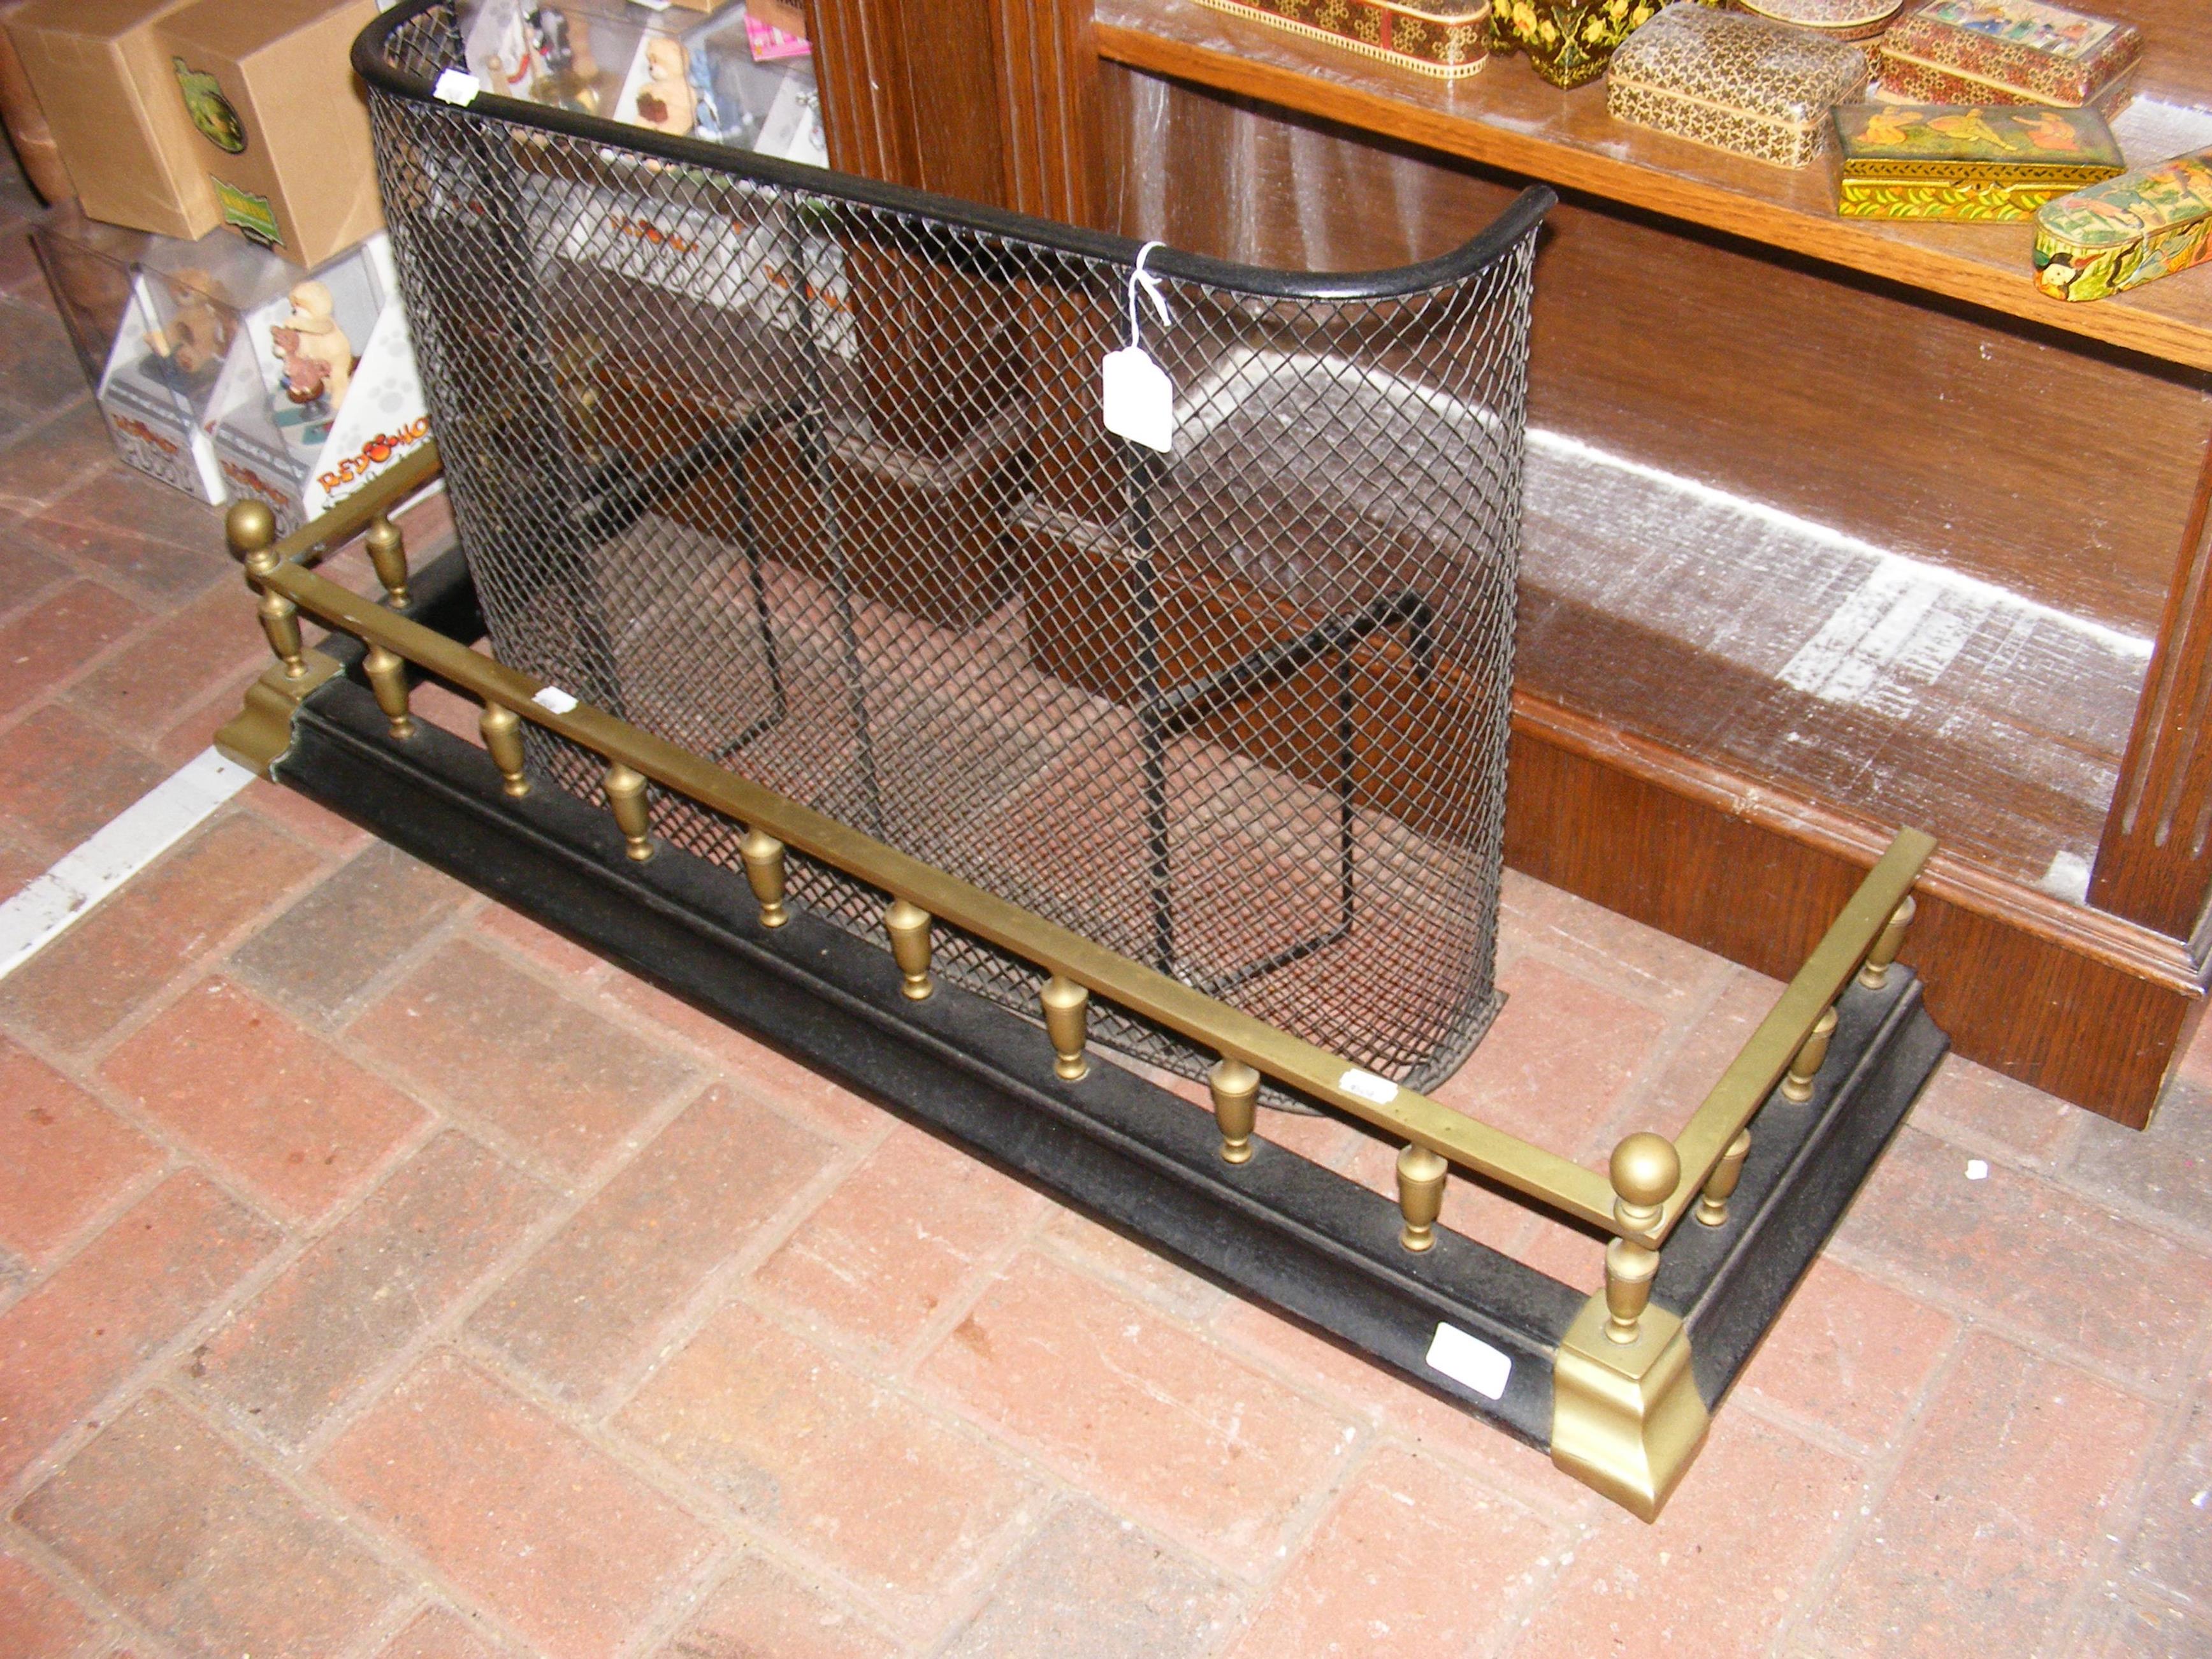 A fire surround and fireguard